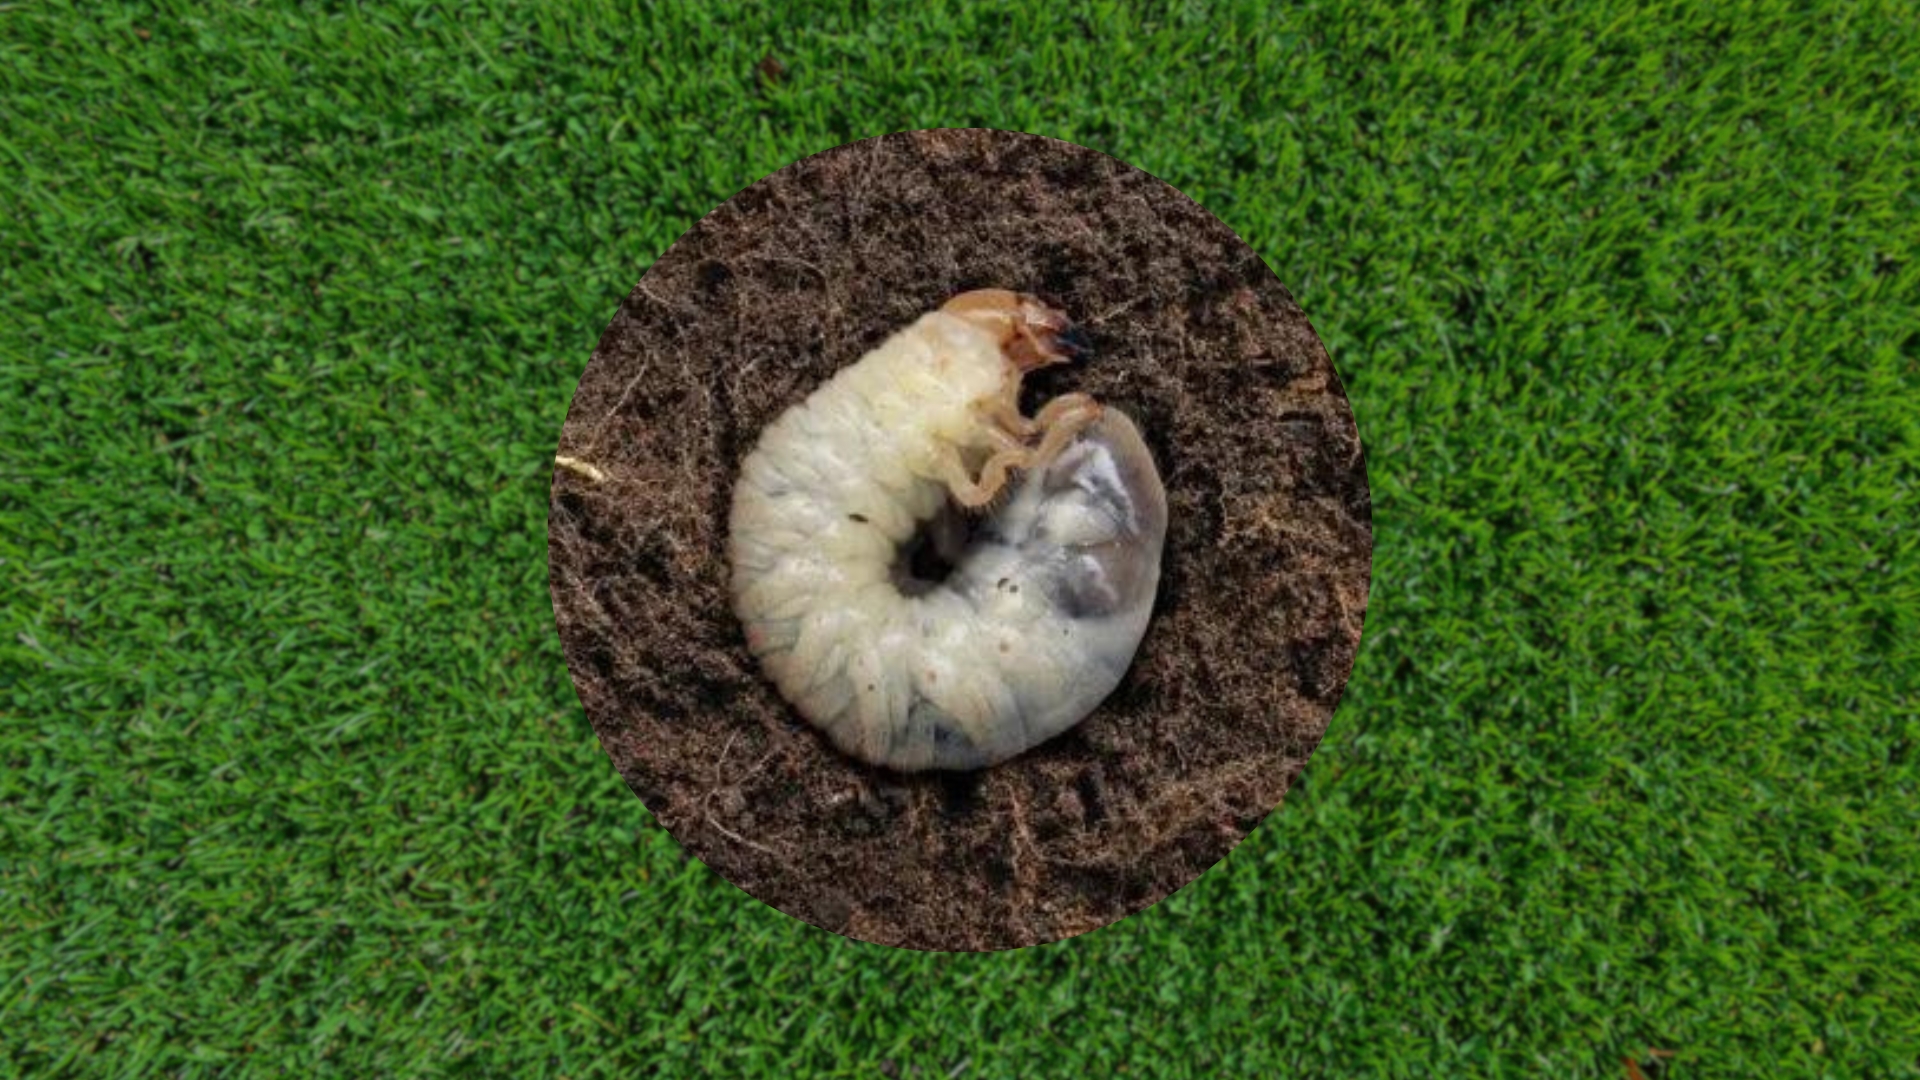 7 Signs Of Grubs In Lawn With Helpful Tips To Remove Them